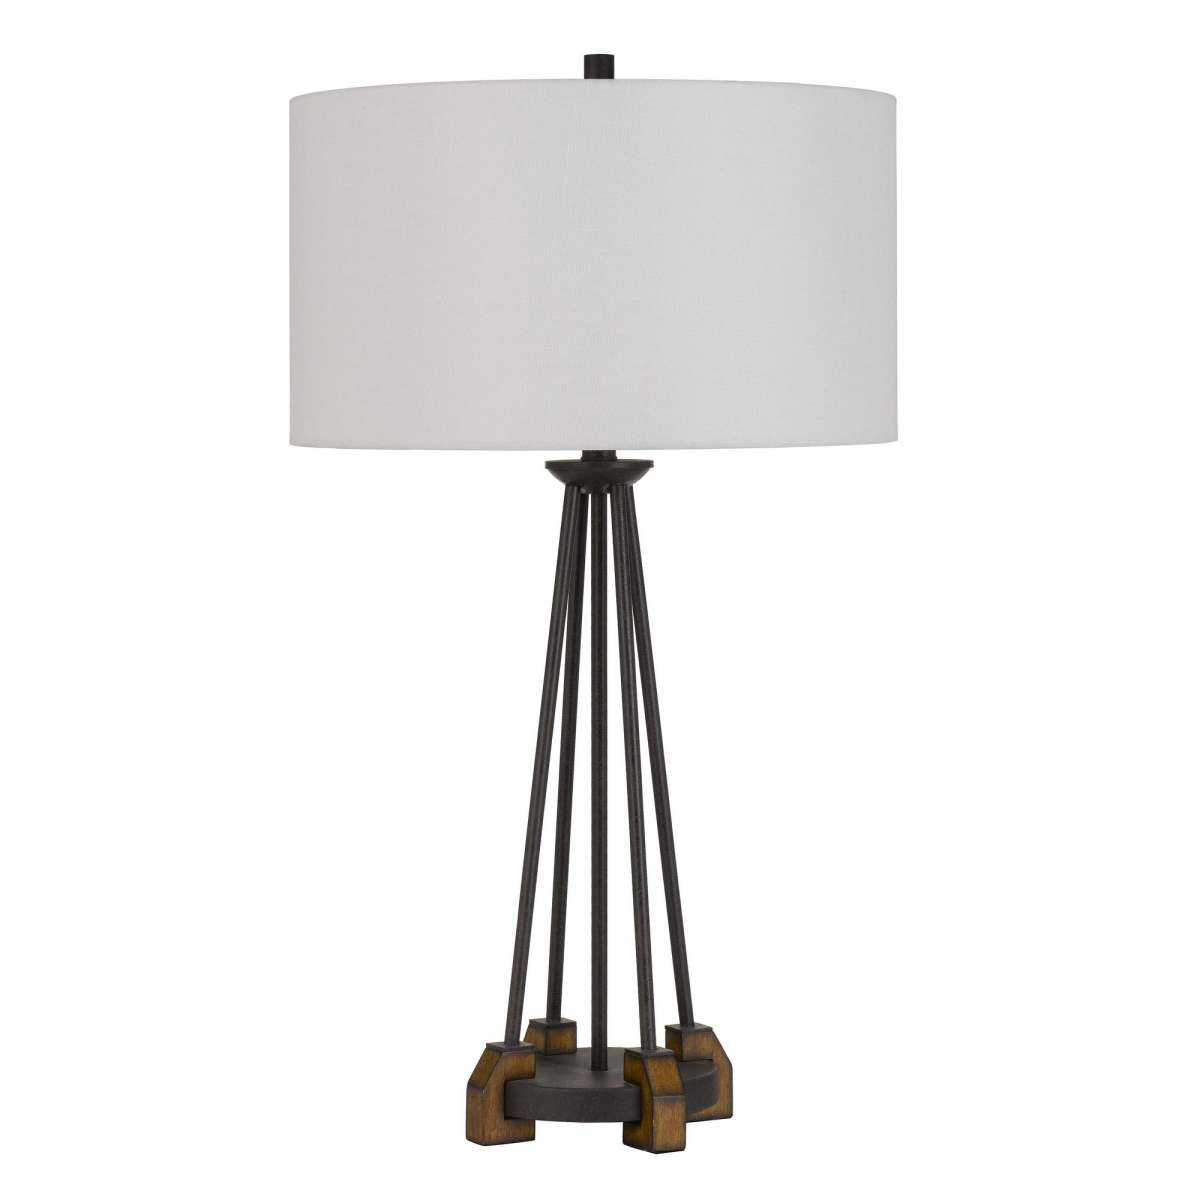 31.25" Metal Table Lamp With Drum Style Shade, Black And Brown By Benzara